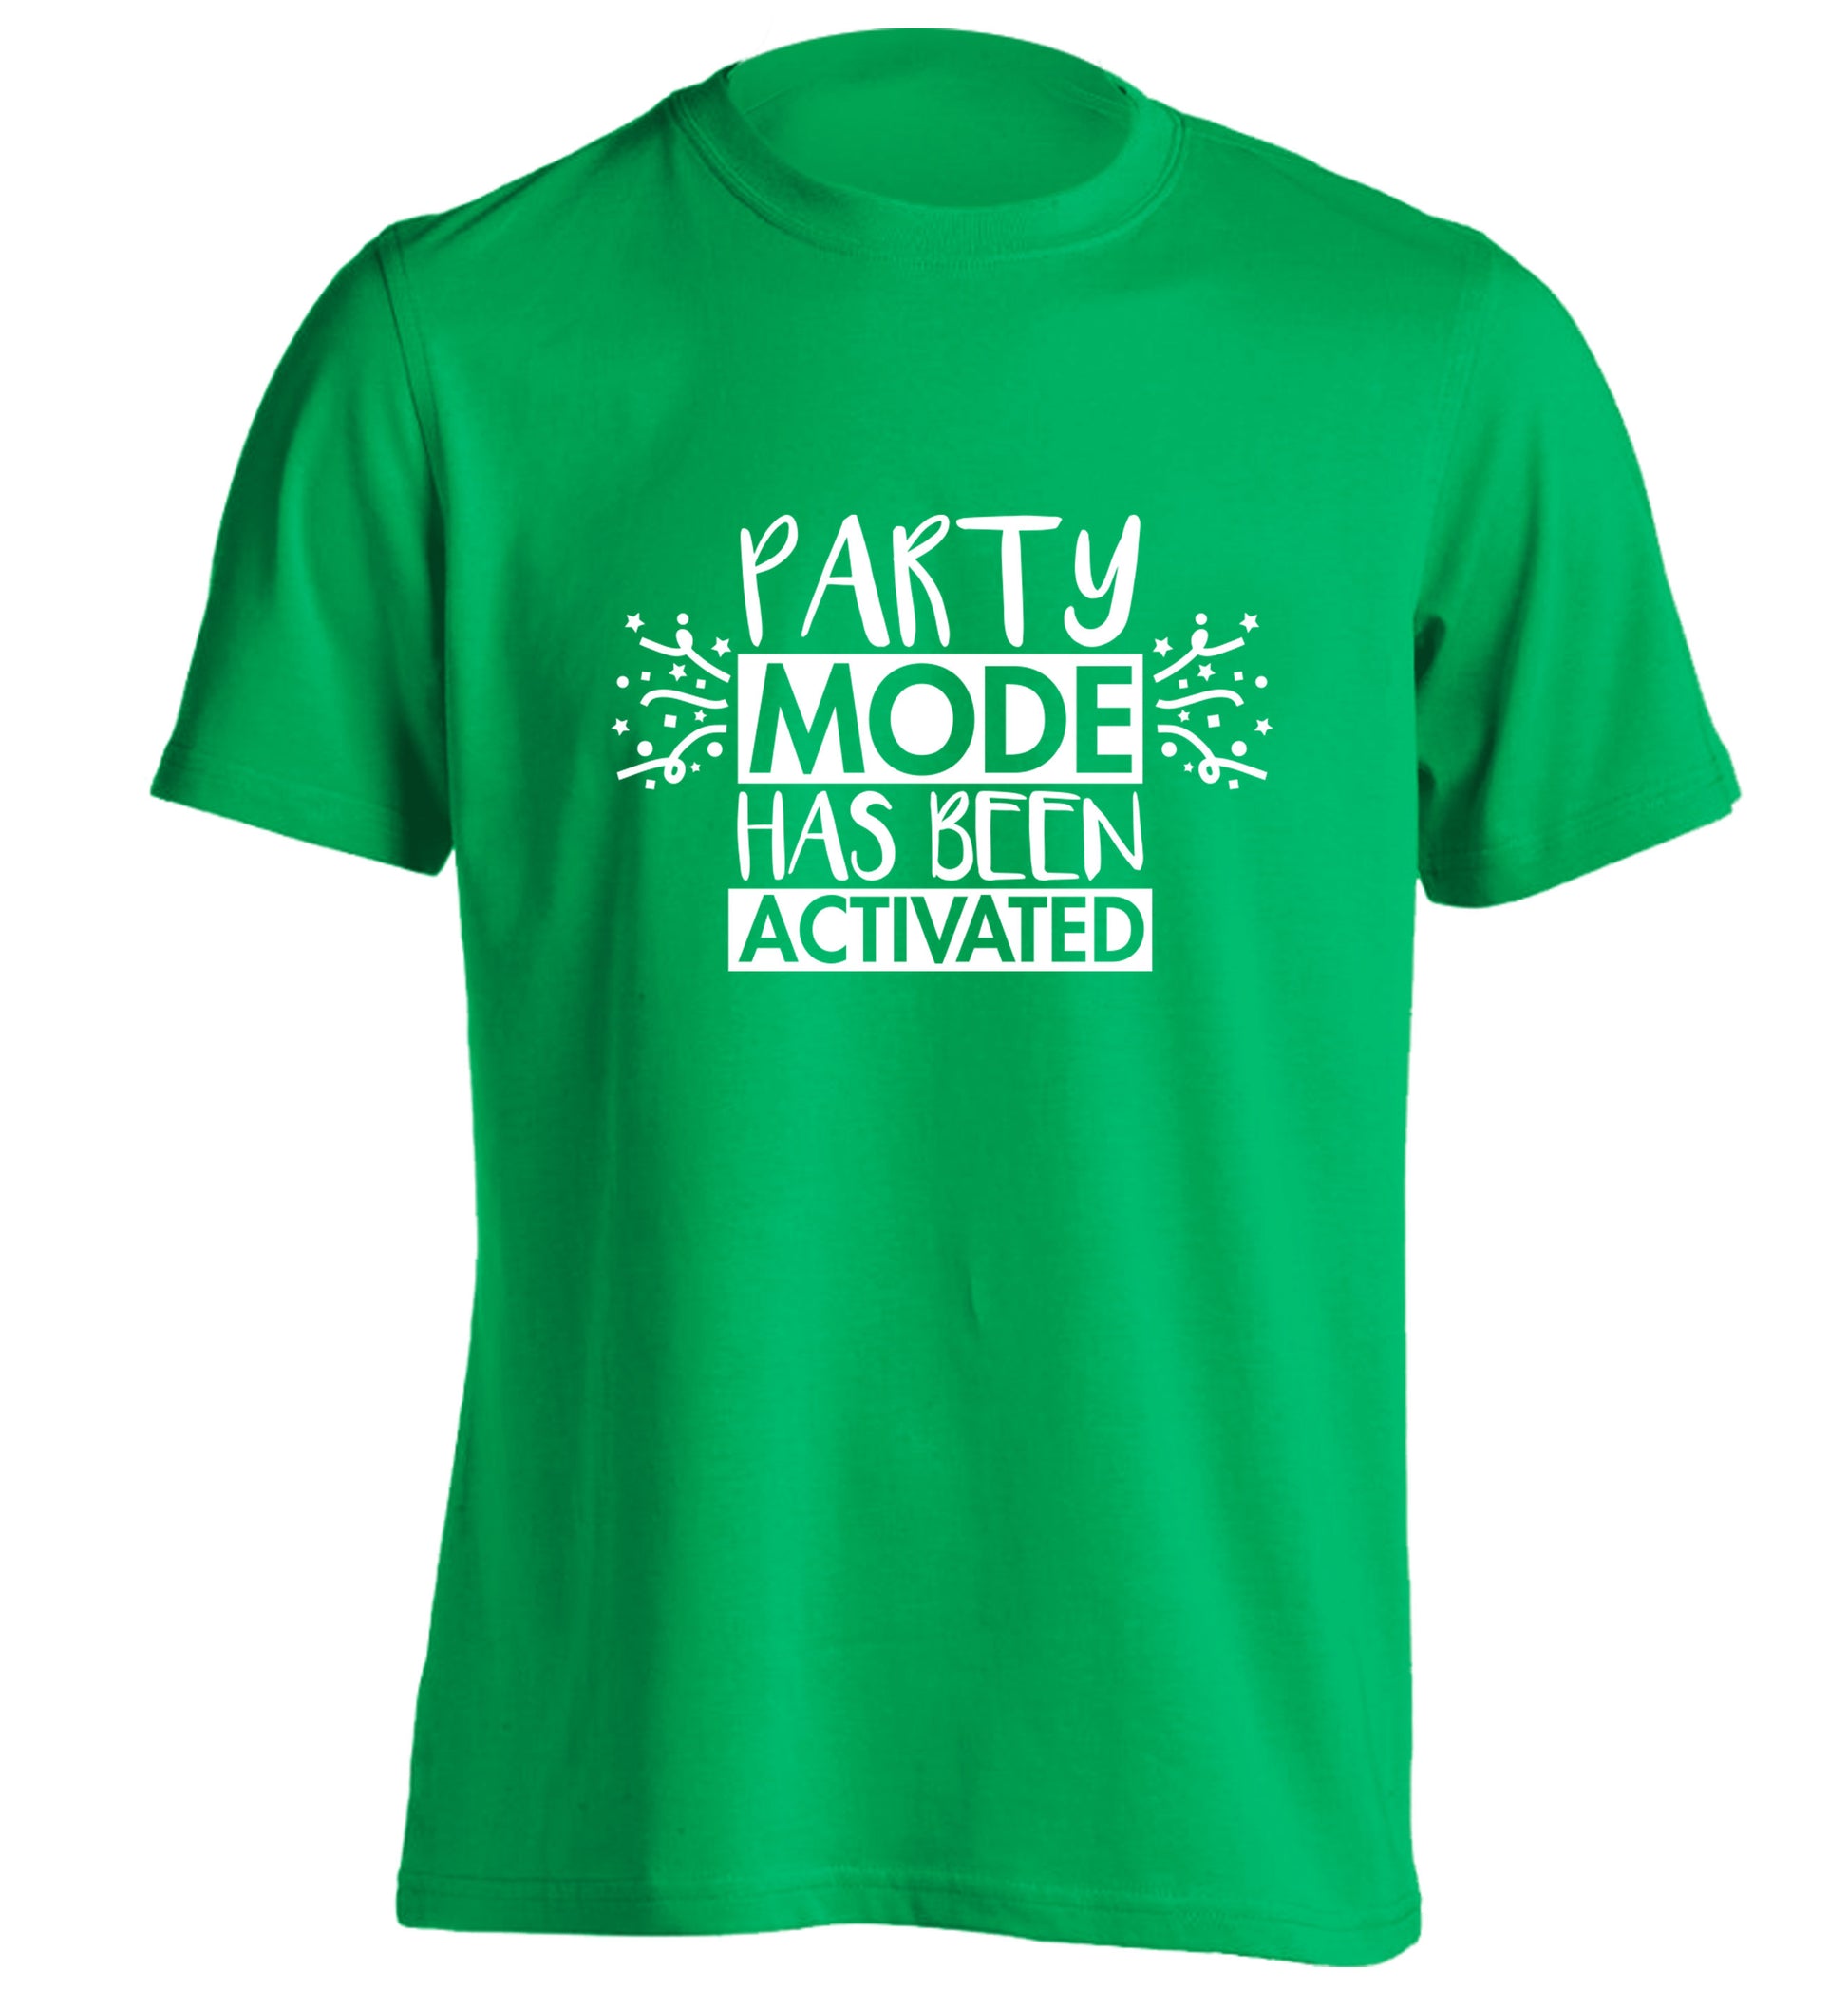 Please do not disturb party mode has been activated adults unisex green Tshirt 2XL